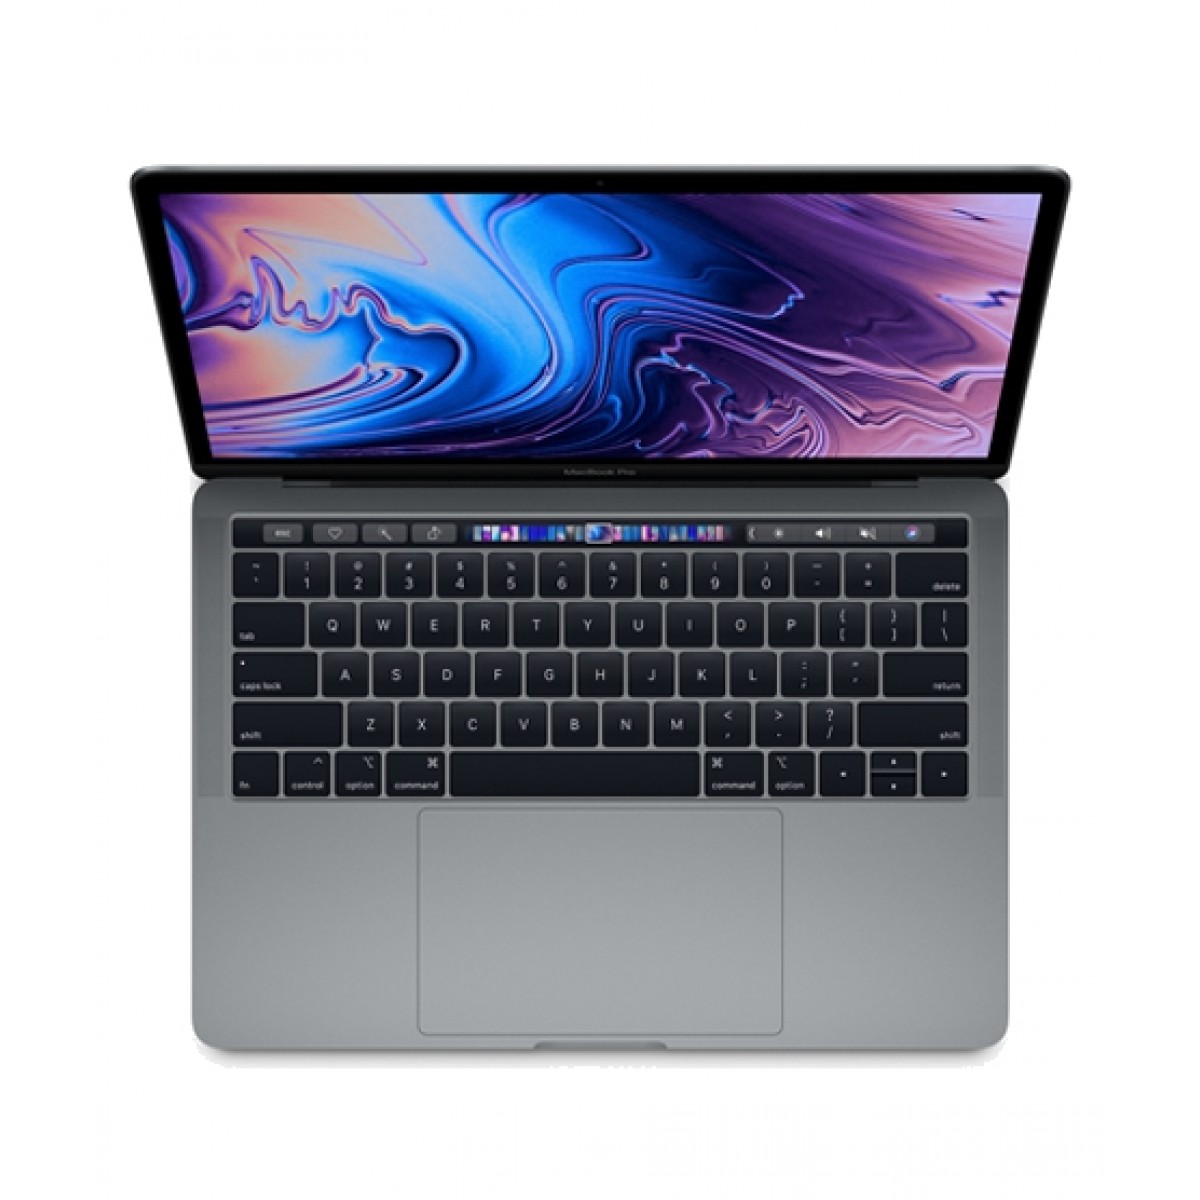 Used Apple Mac book Pro 13-inch 2018 (Touch bar) in a very clean and neat condition with Intel Core i5 2.3Ghz processor, 8GB RAM, 256 GB SSD